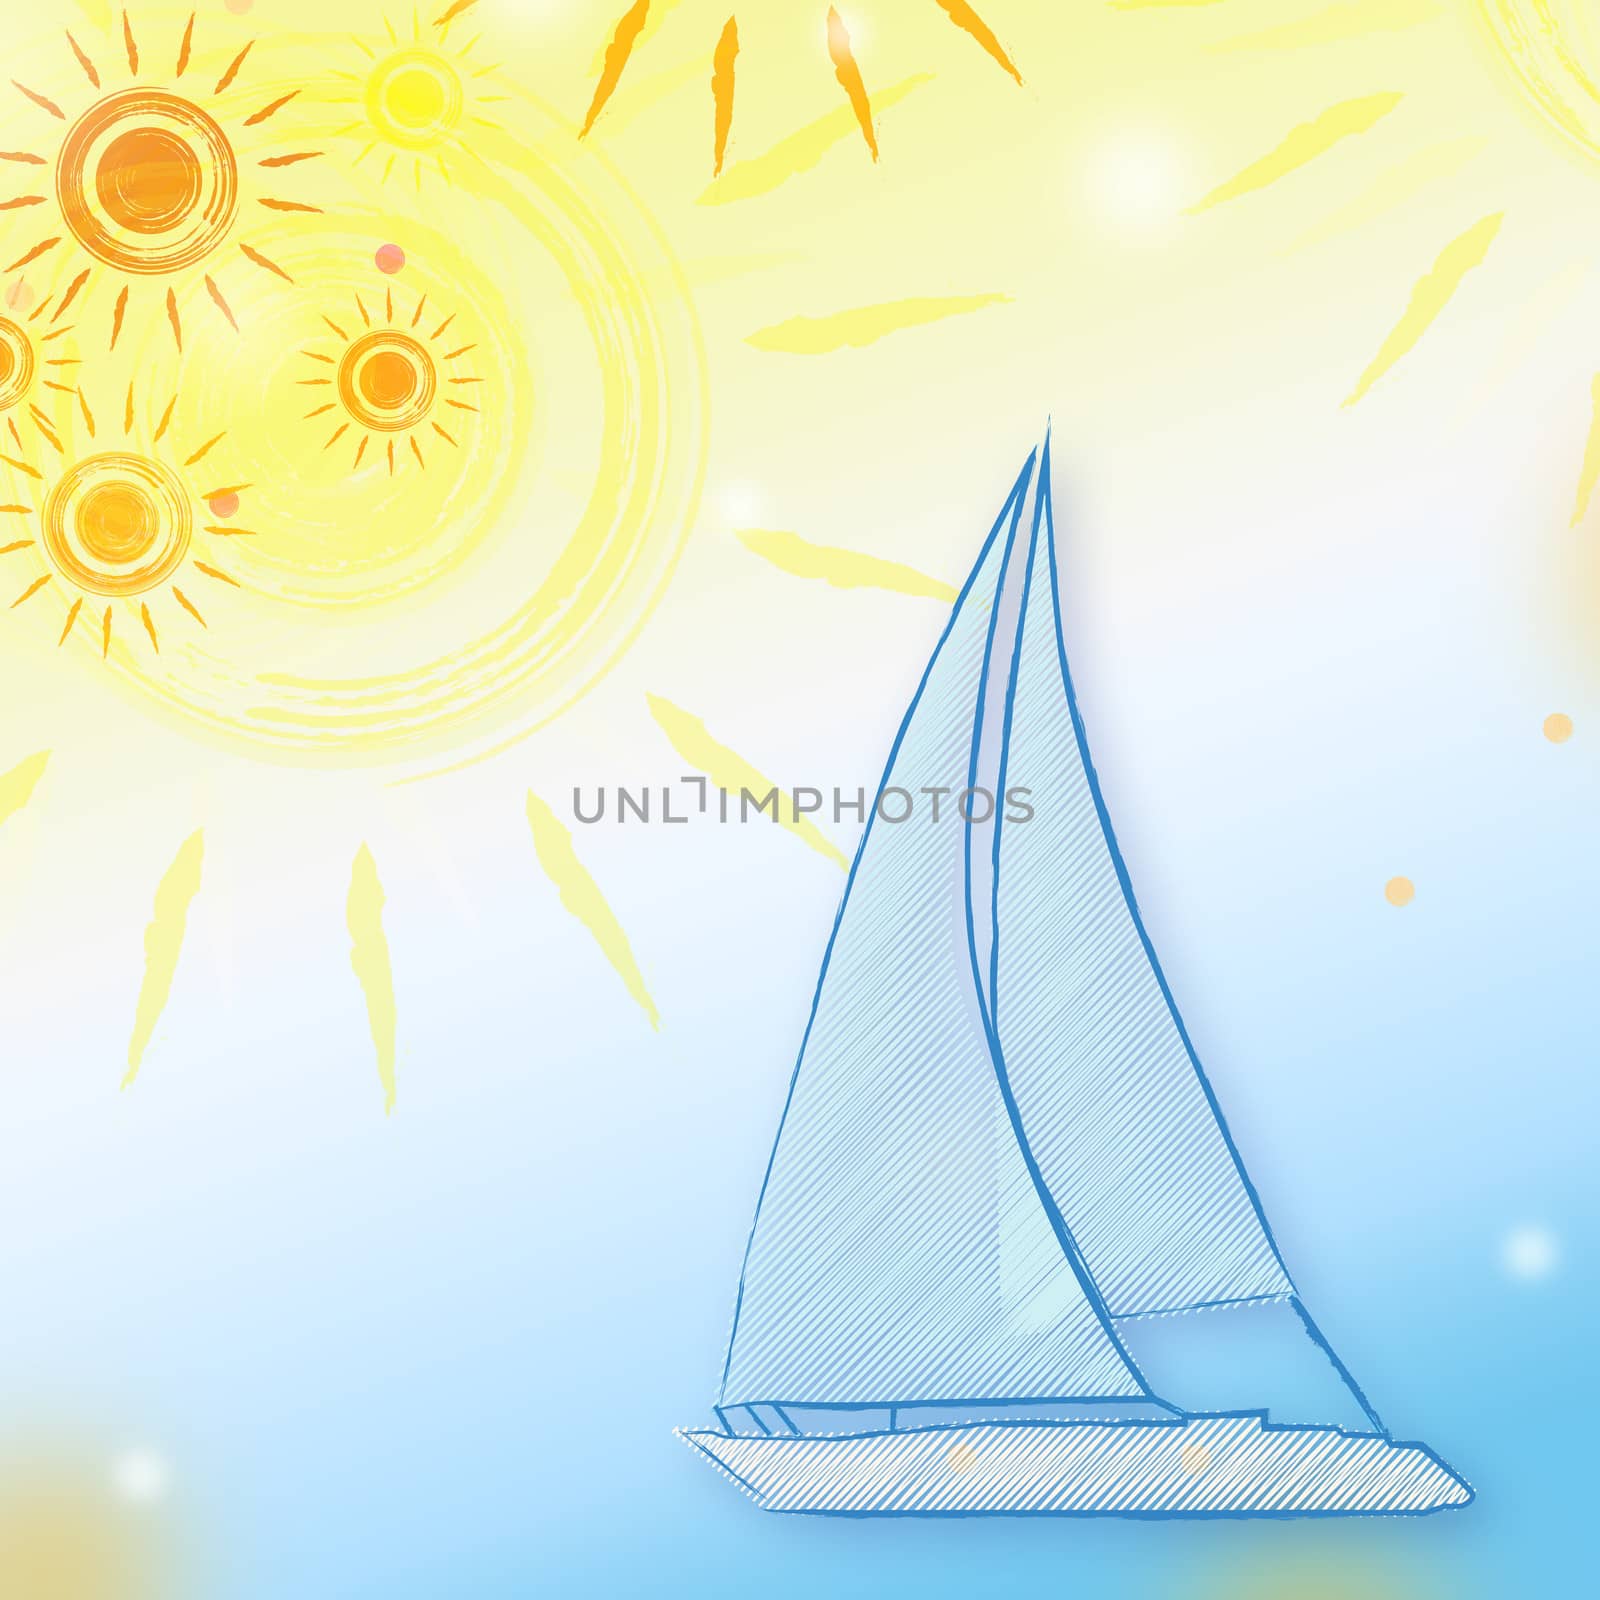 abstract summer background with drawn yellow suns and blue boat